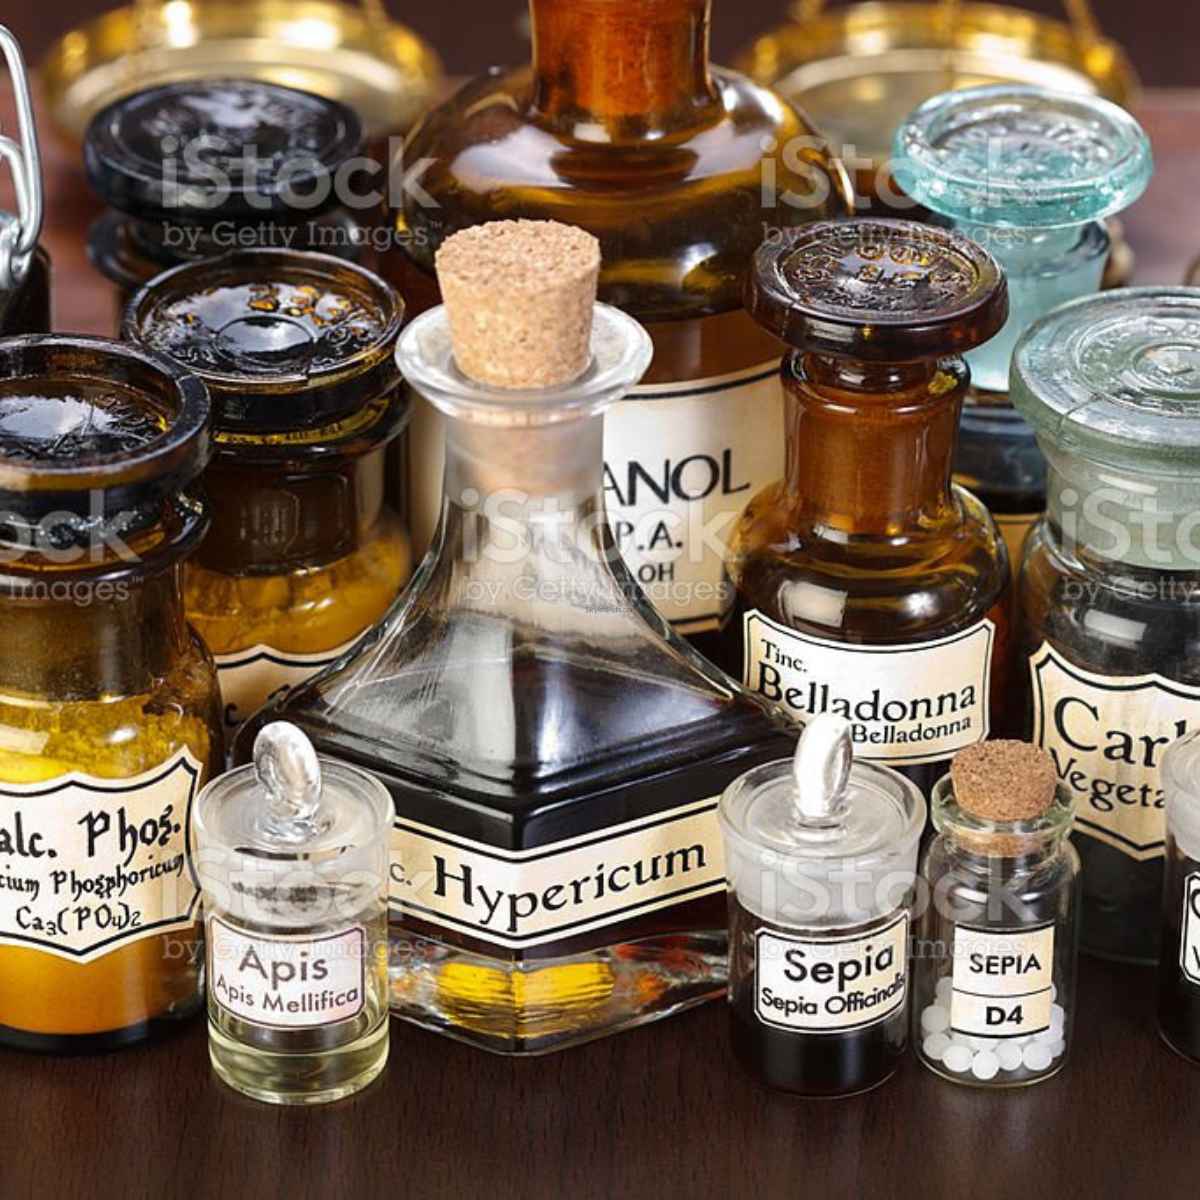 A number of bottles having homeopathy medicines